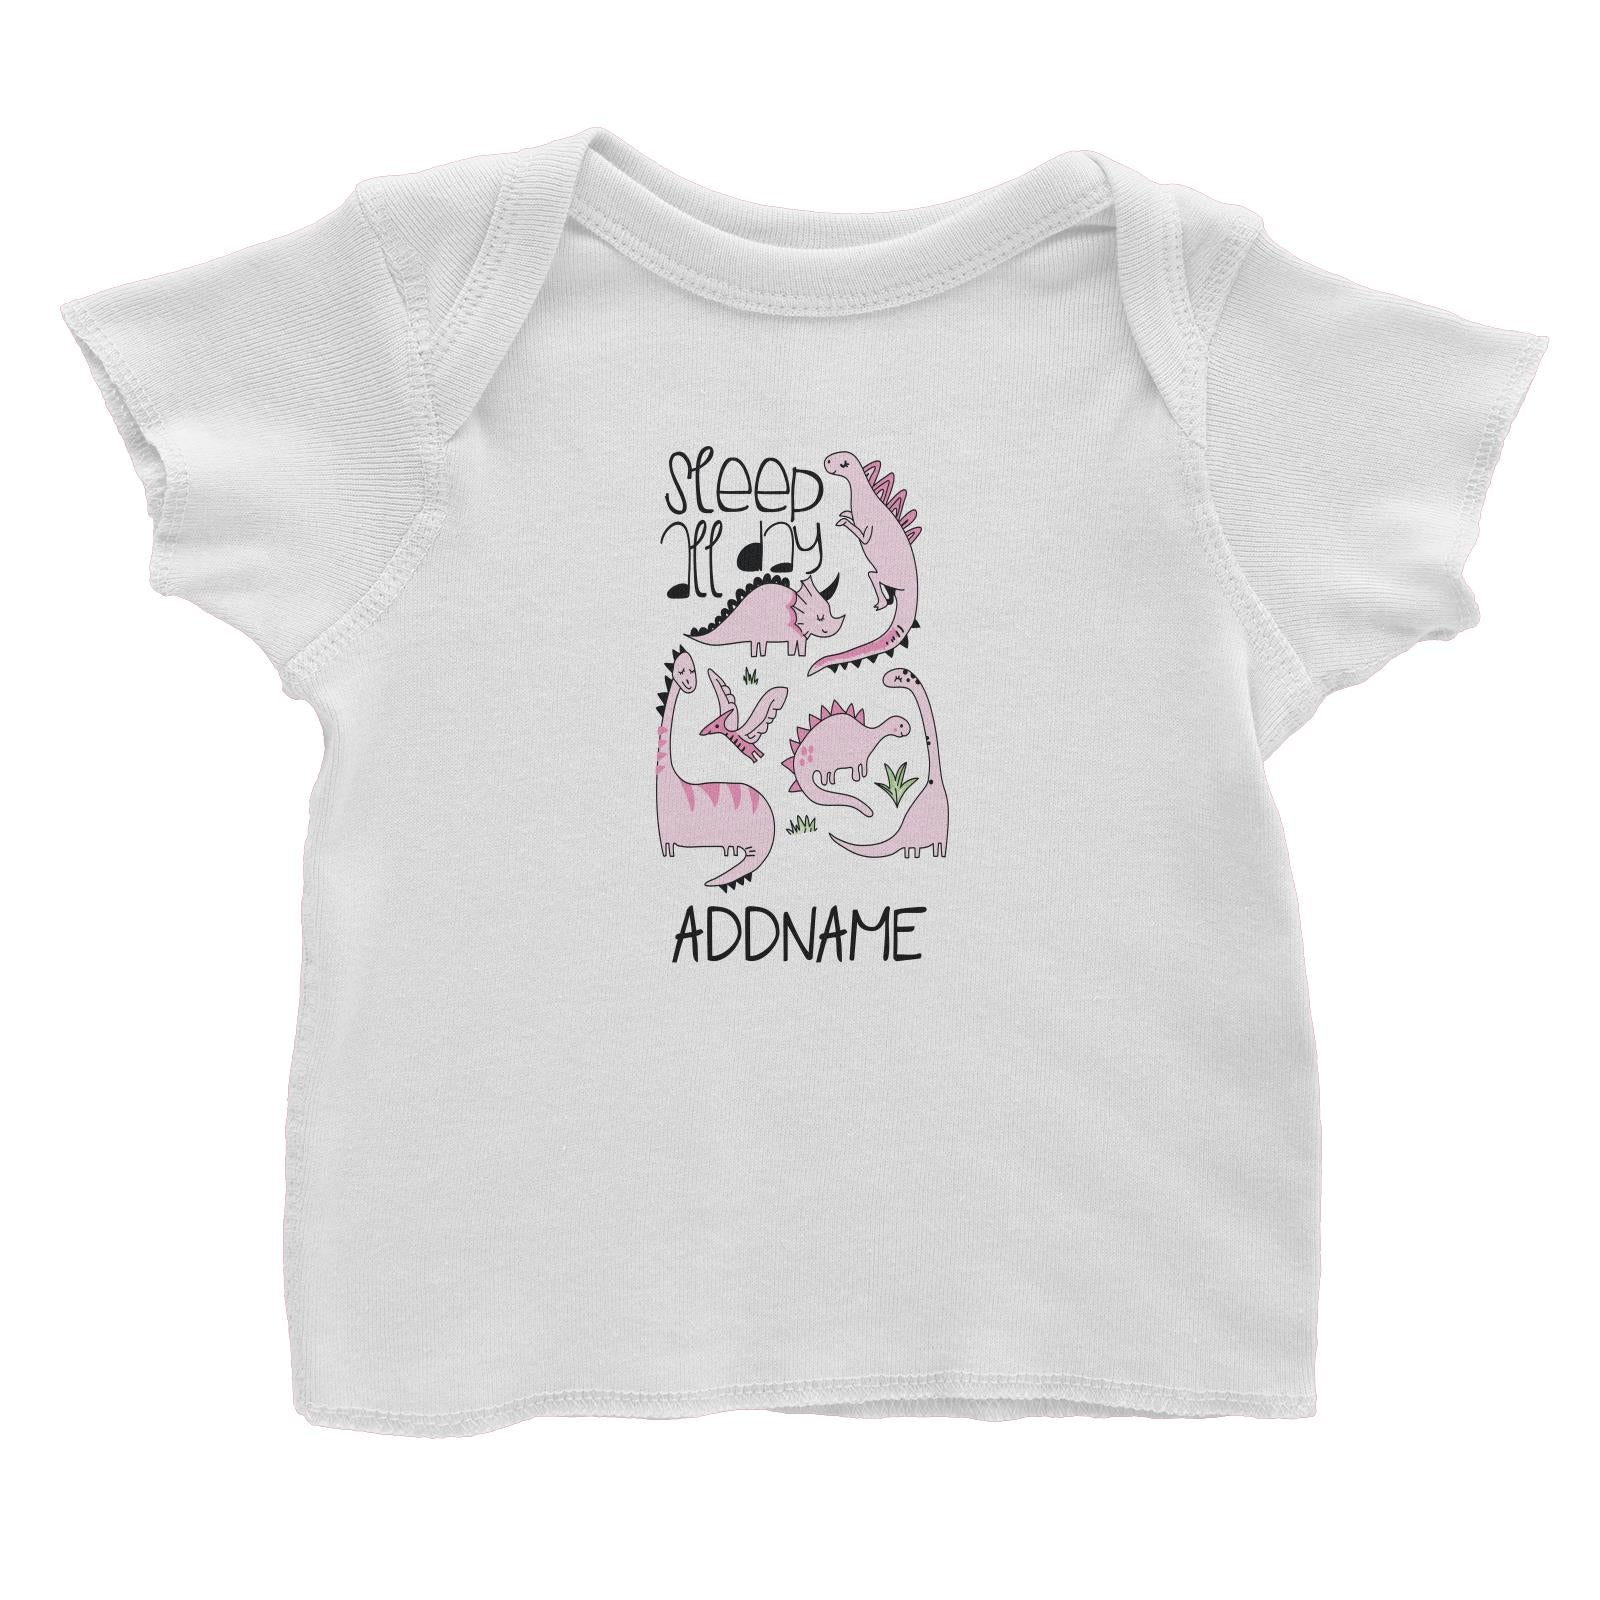 Cool Vibrant Series Sleep All Day Dinosaur Addname Baby T-Shirt [SALE]